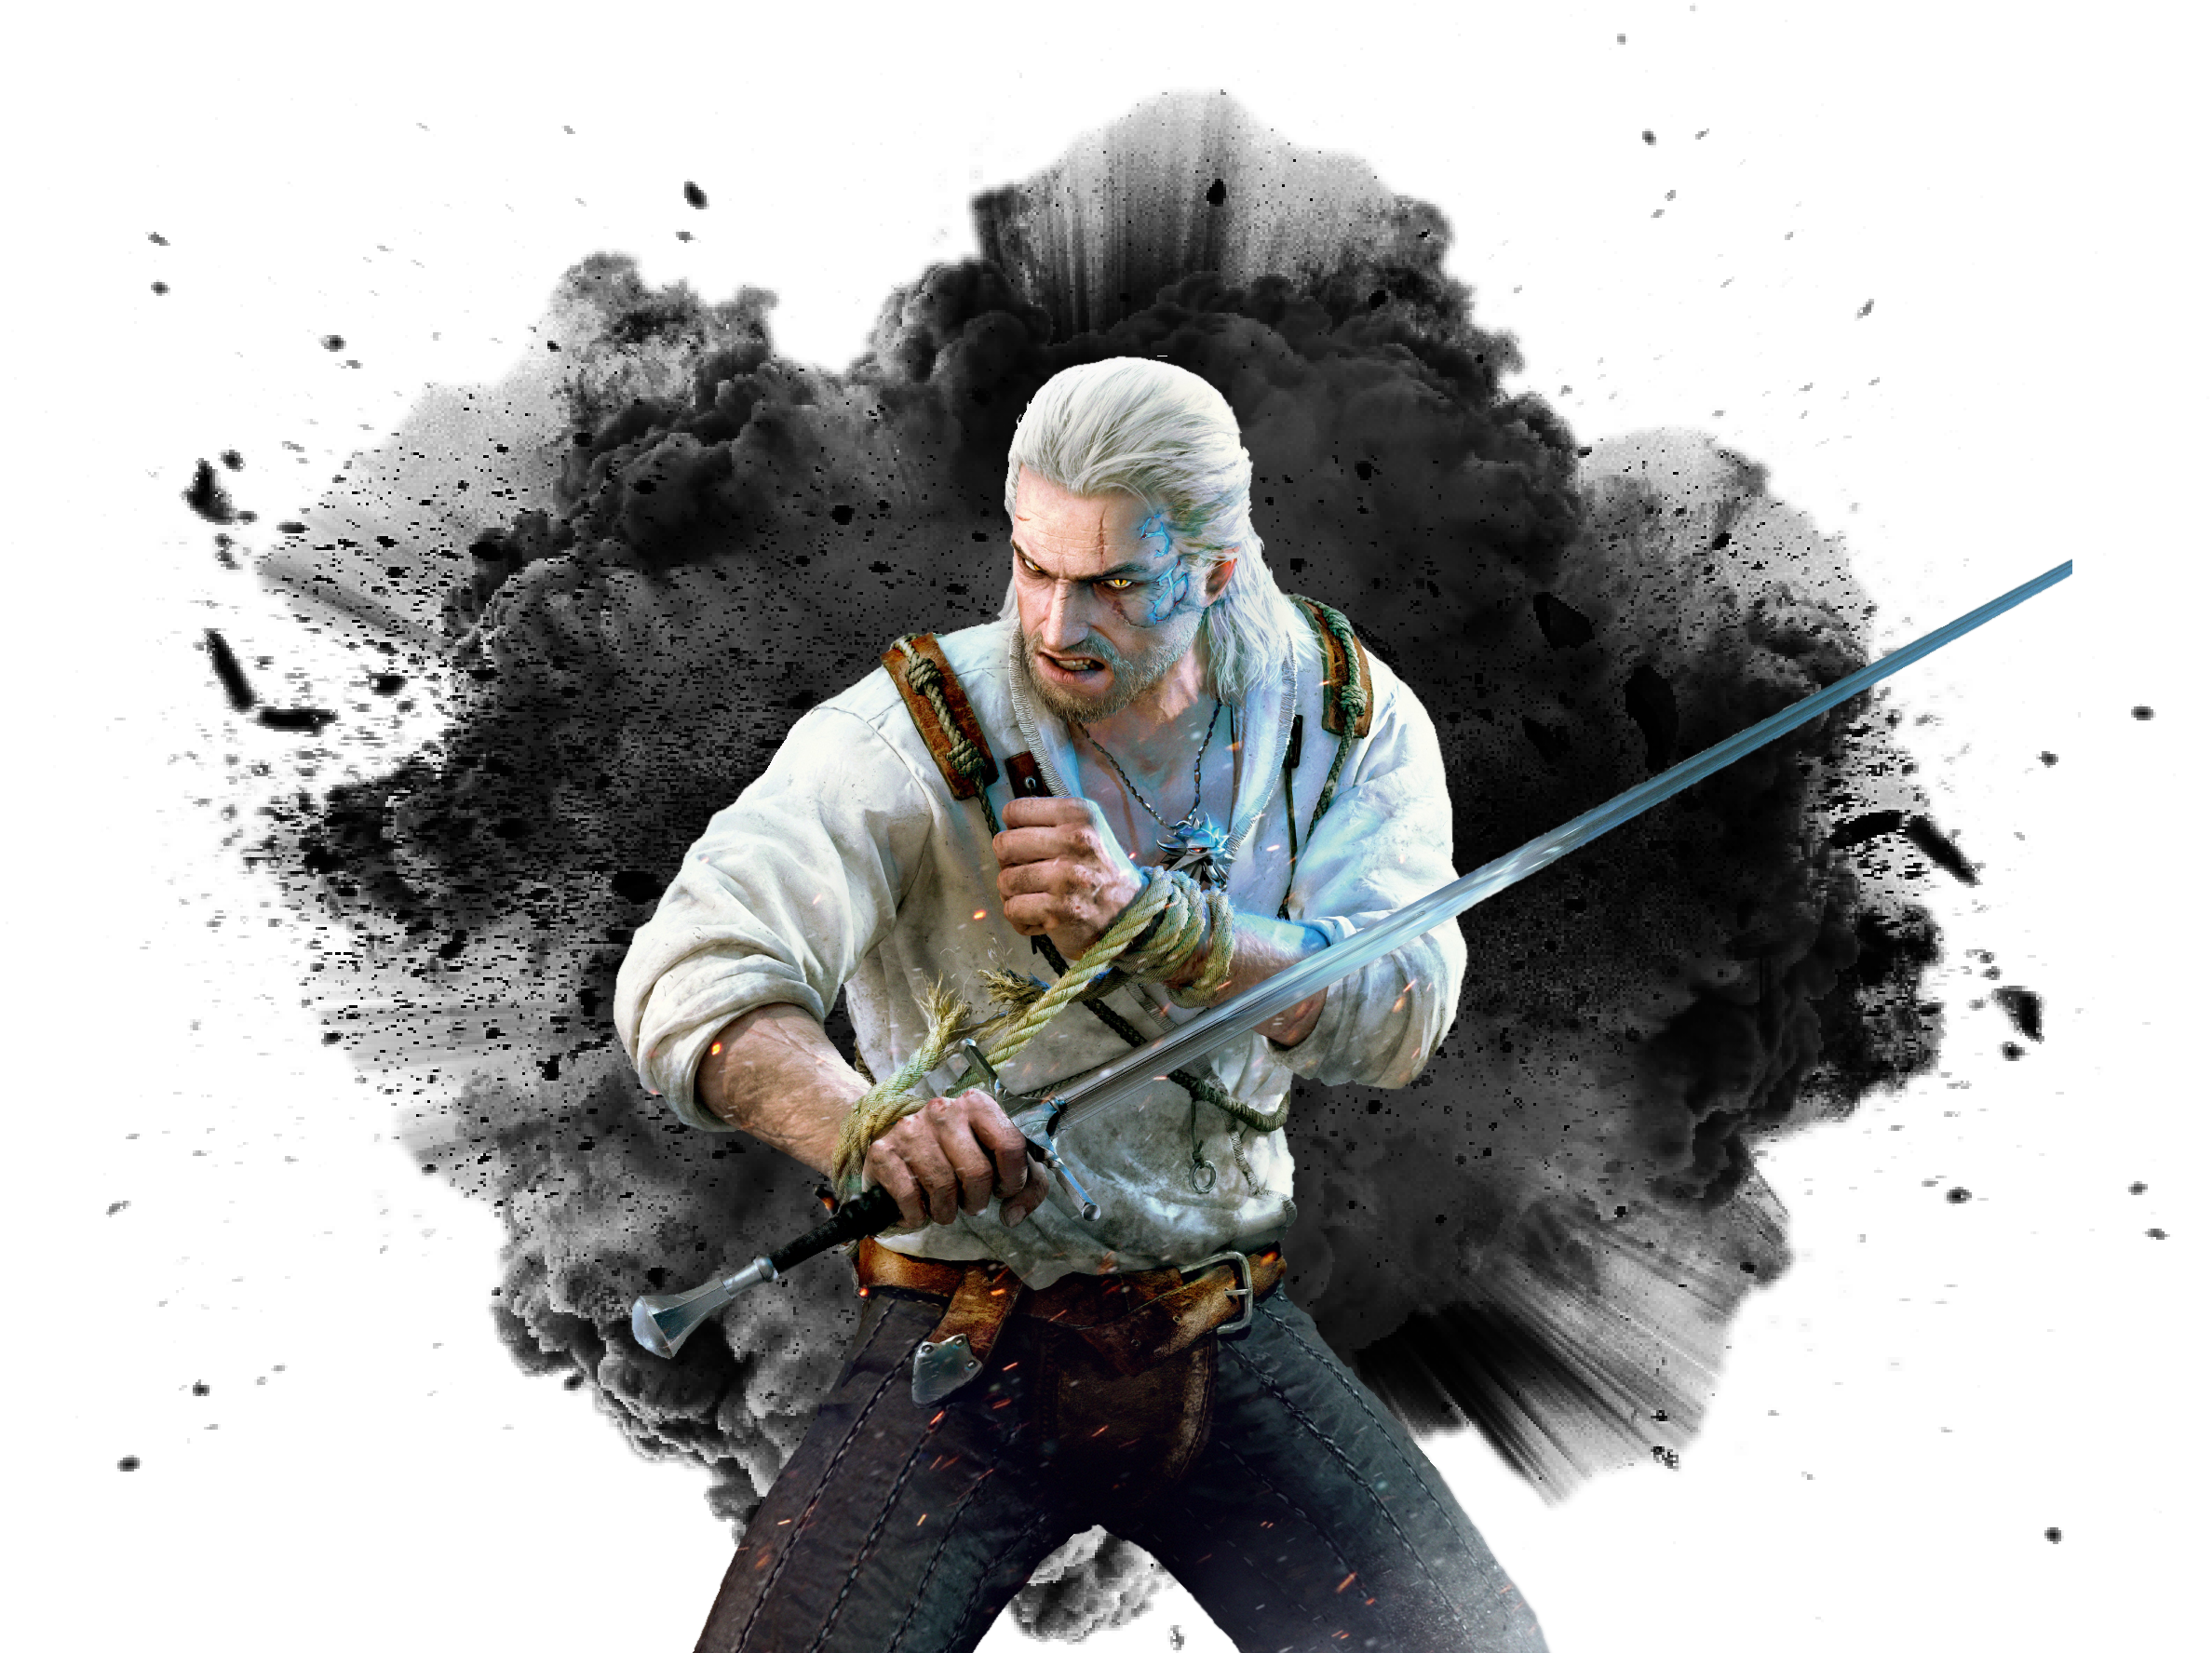 General 2376x1776 Geralt of Rivia The Witcher sword white hair video games video game characters